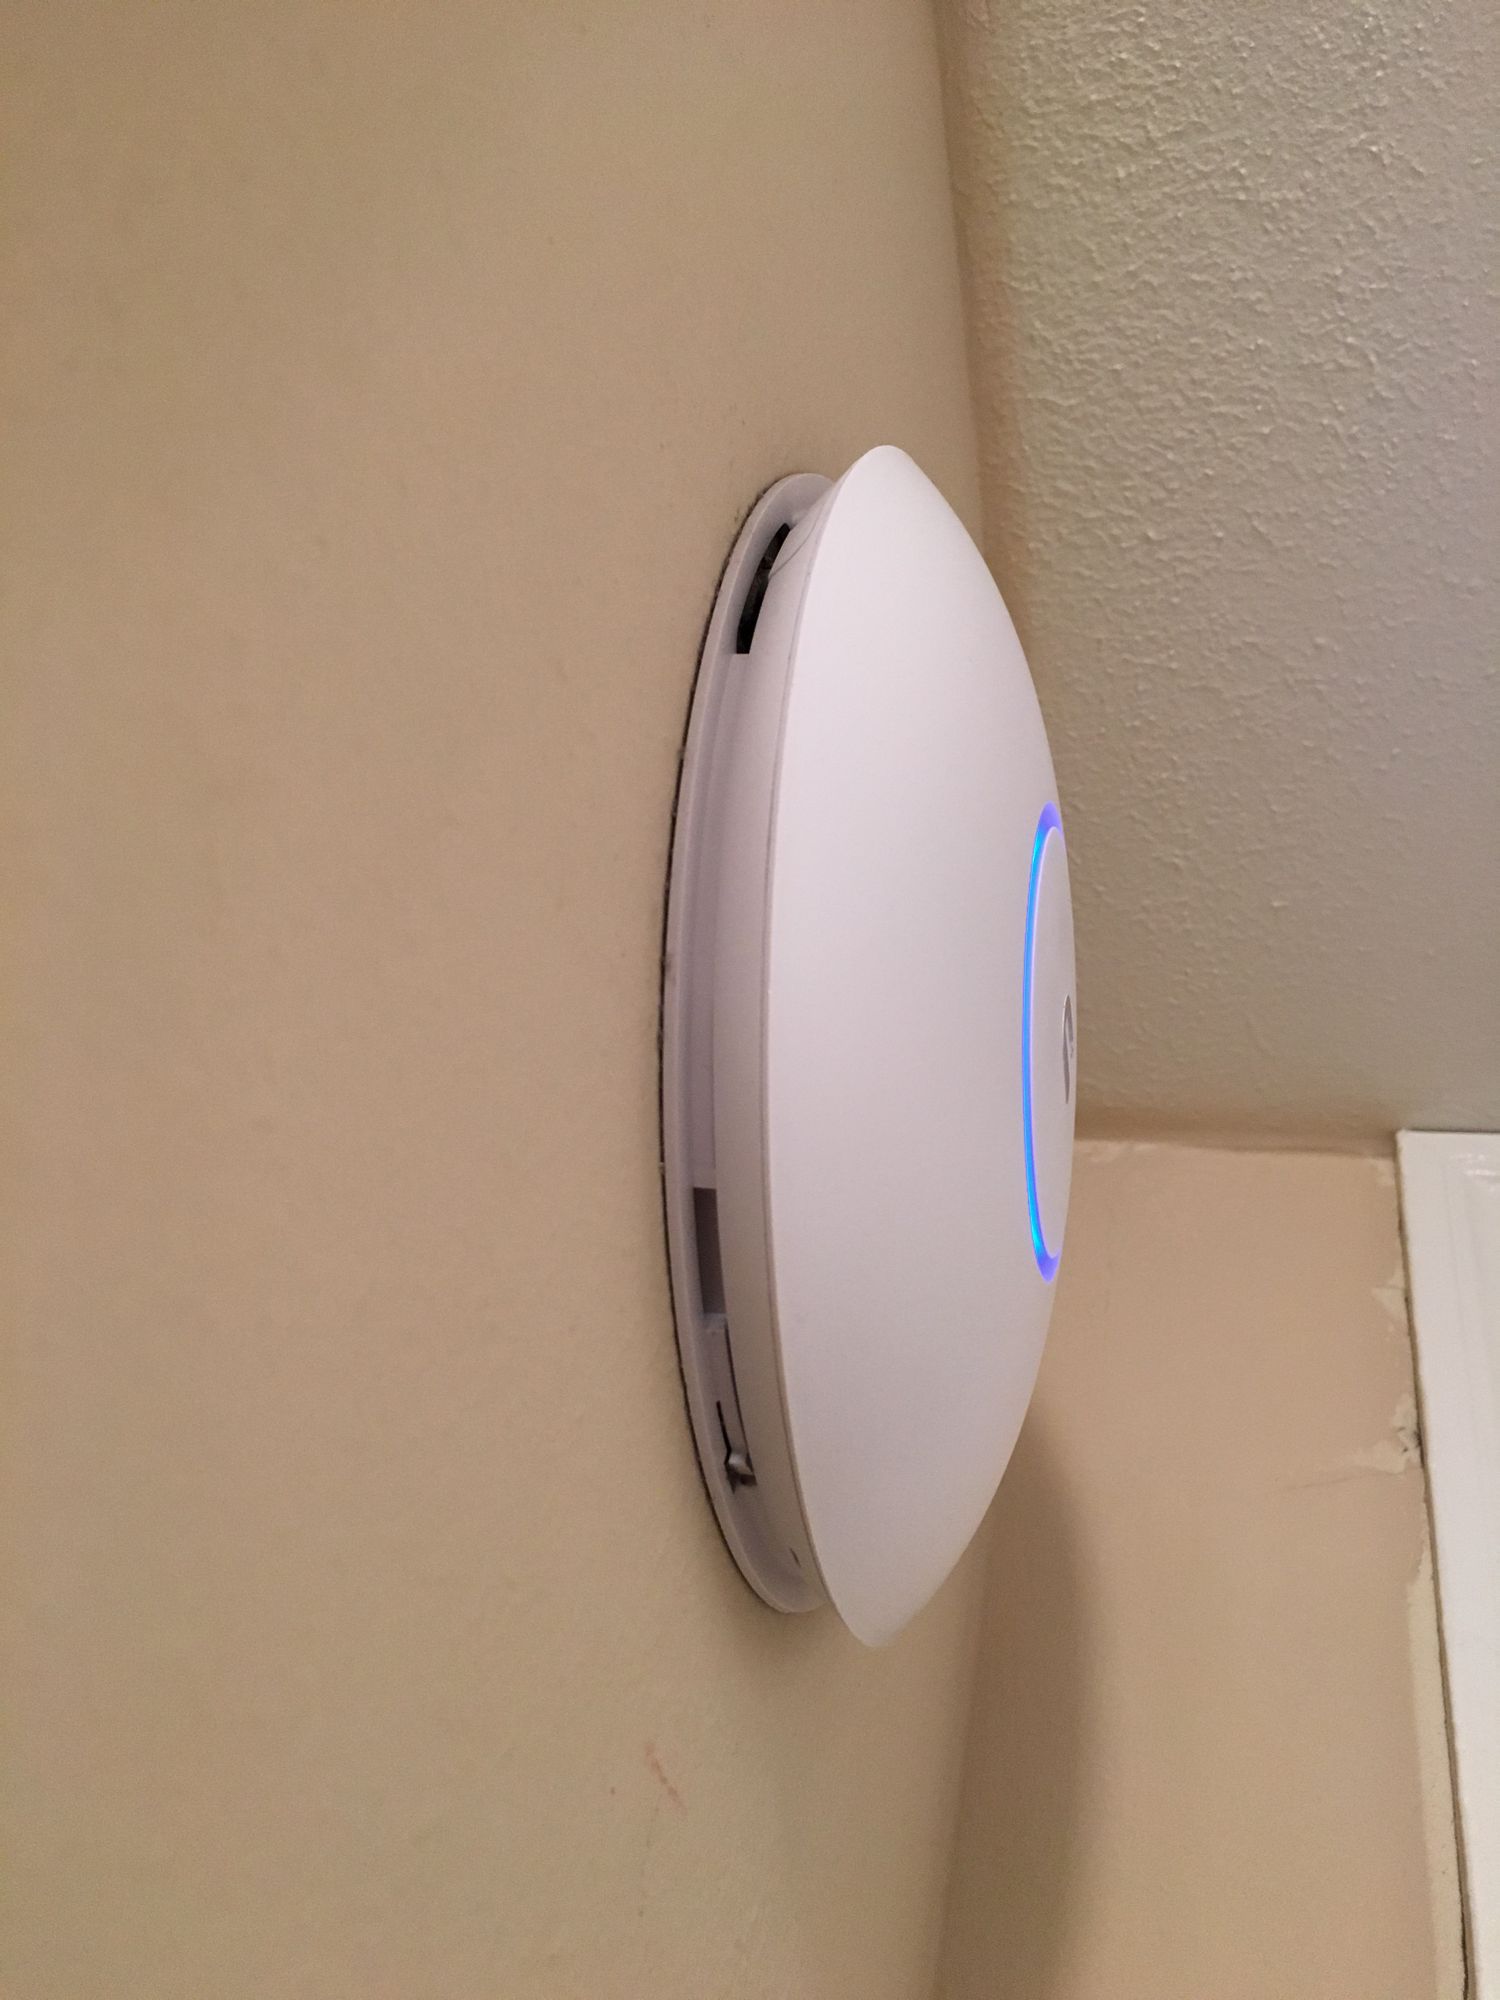 So the new AP AC Pro DOES NOT use the same | Ubiquiti Community